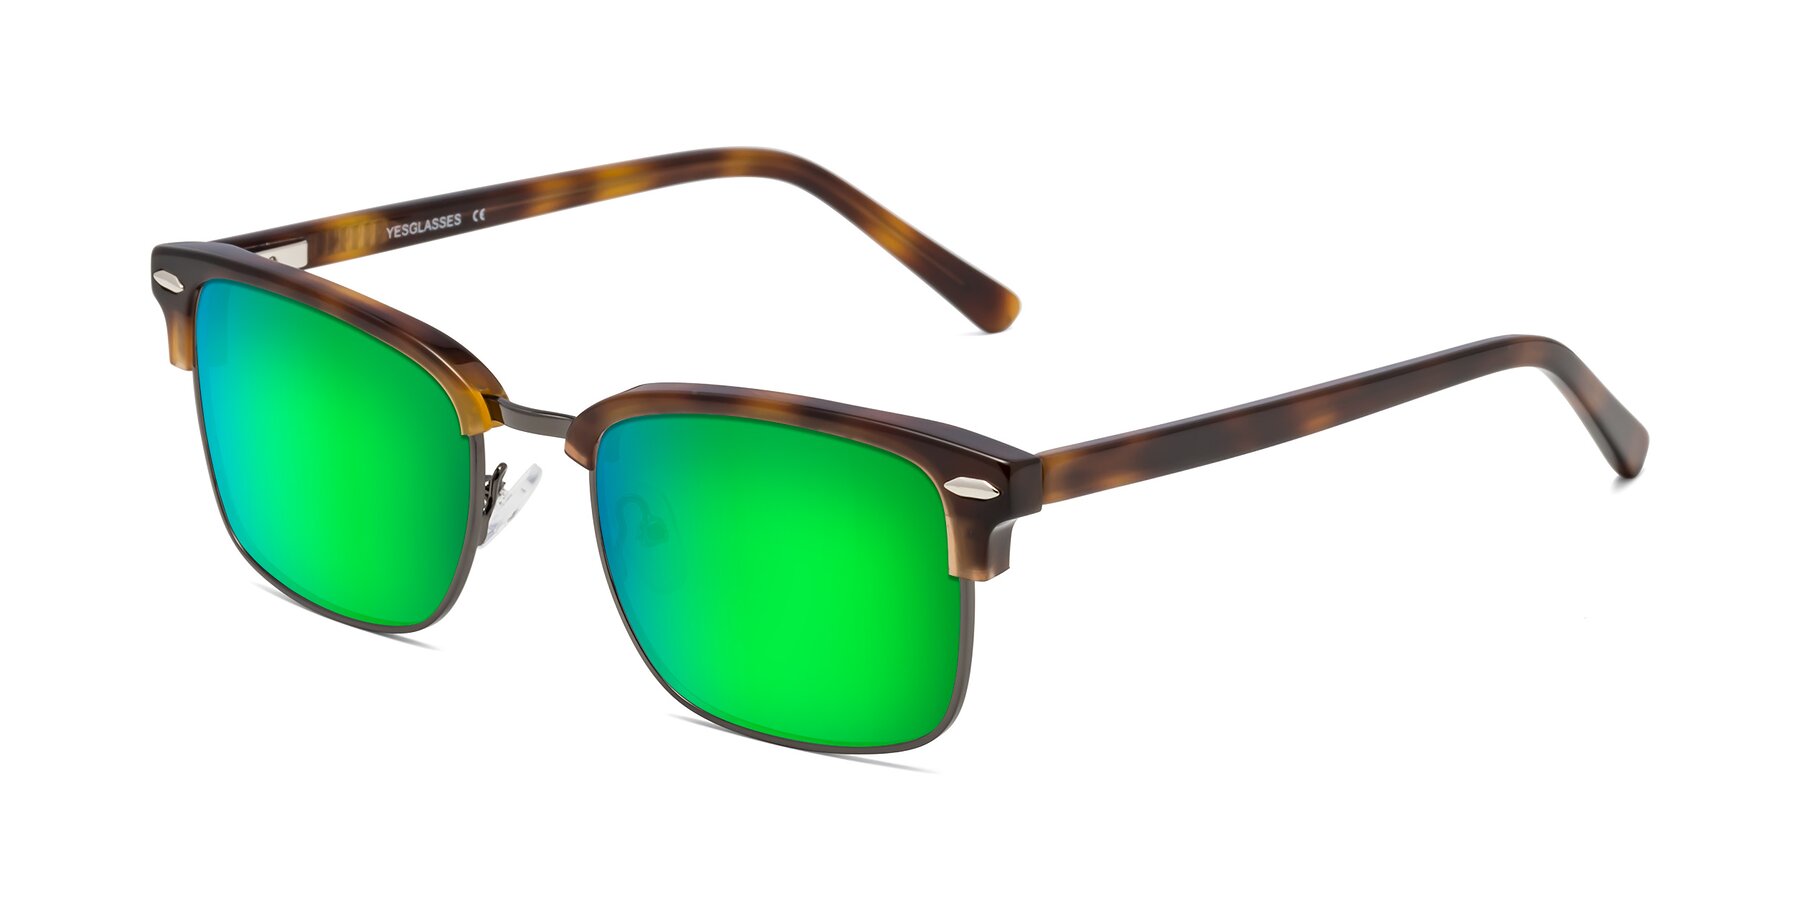 Angle of 17464 in Tortoise/ Gunmetal with Green Mirrored Lenses